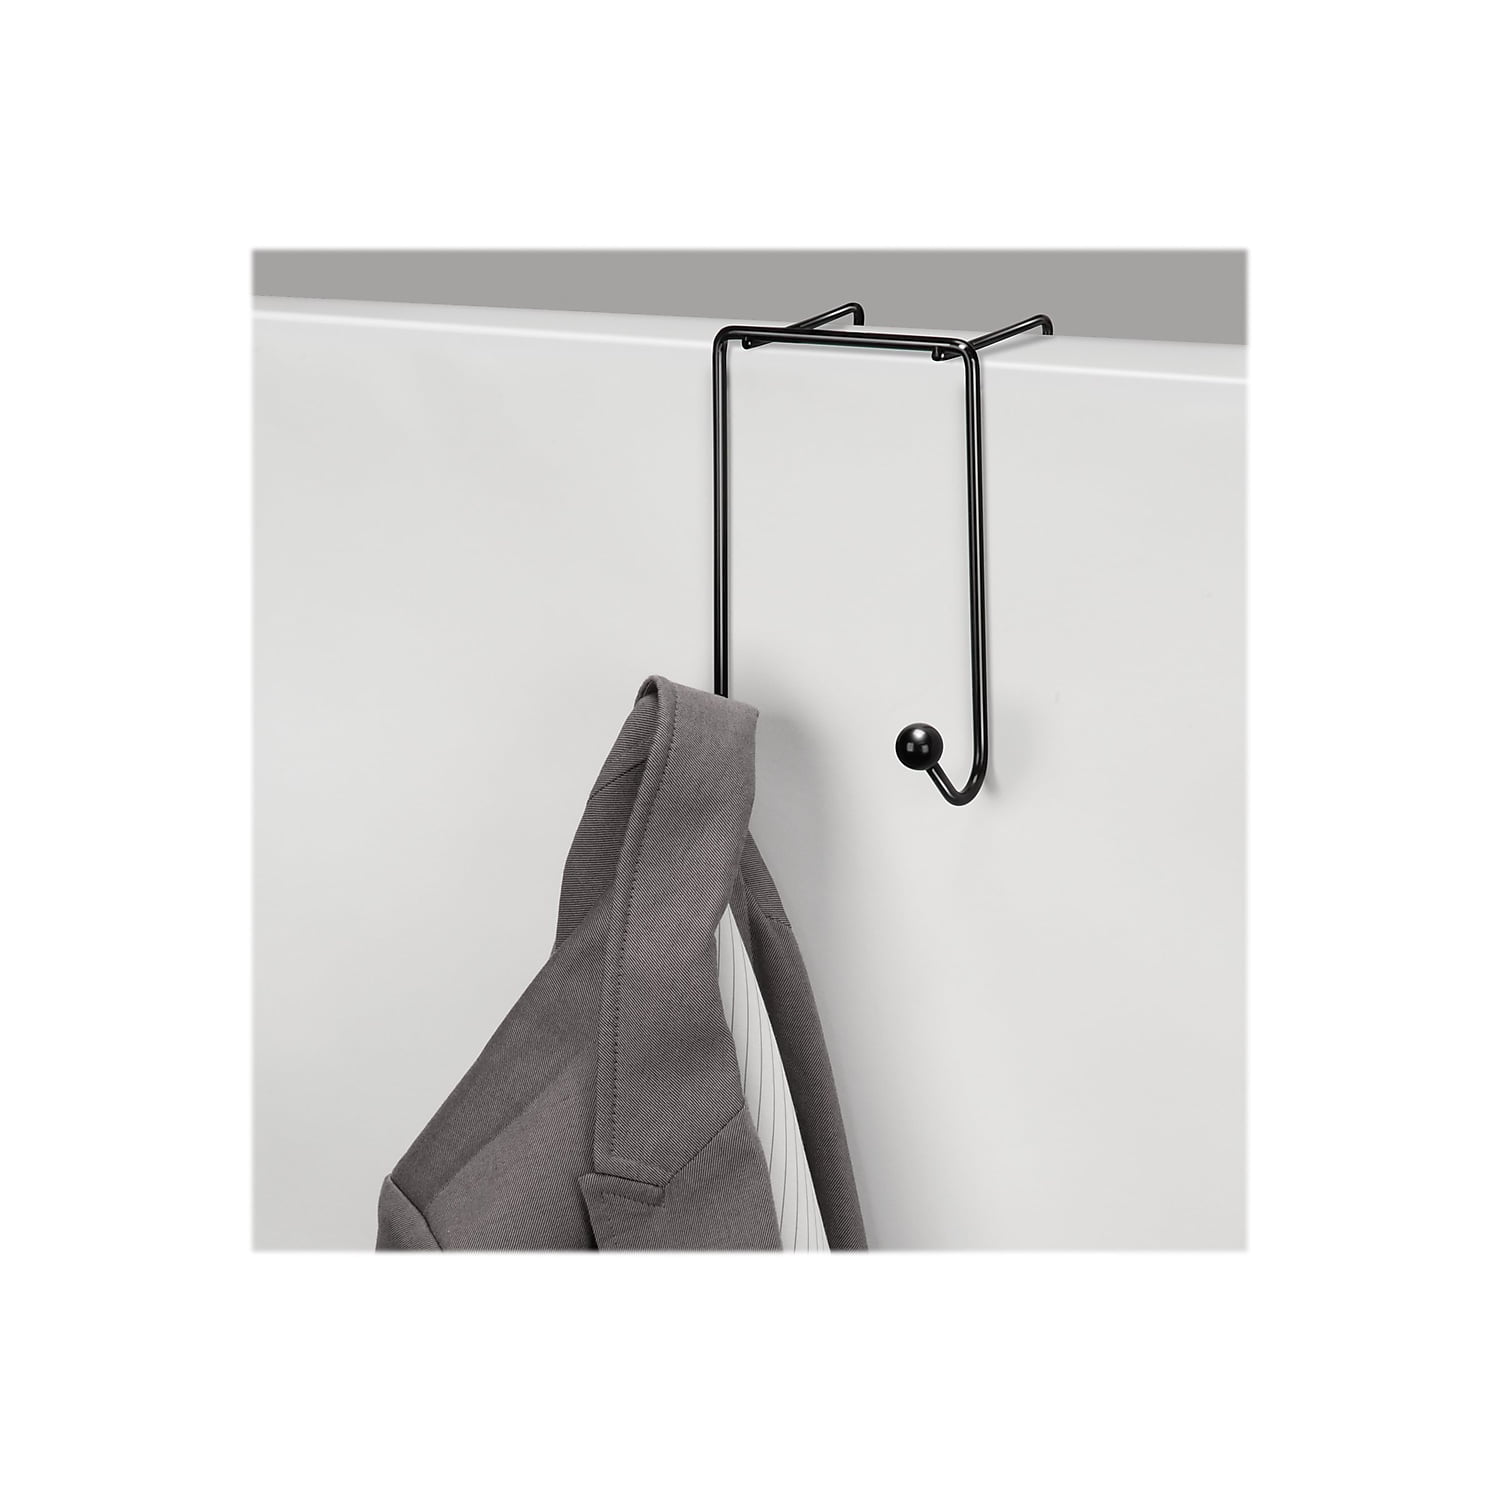 Details about   Fellowes Wire Partition Additions Plastic Double Coat Hook Black 75510 423889 